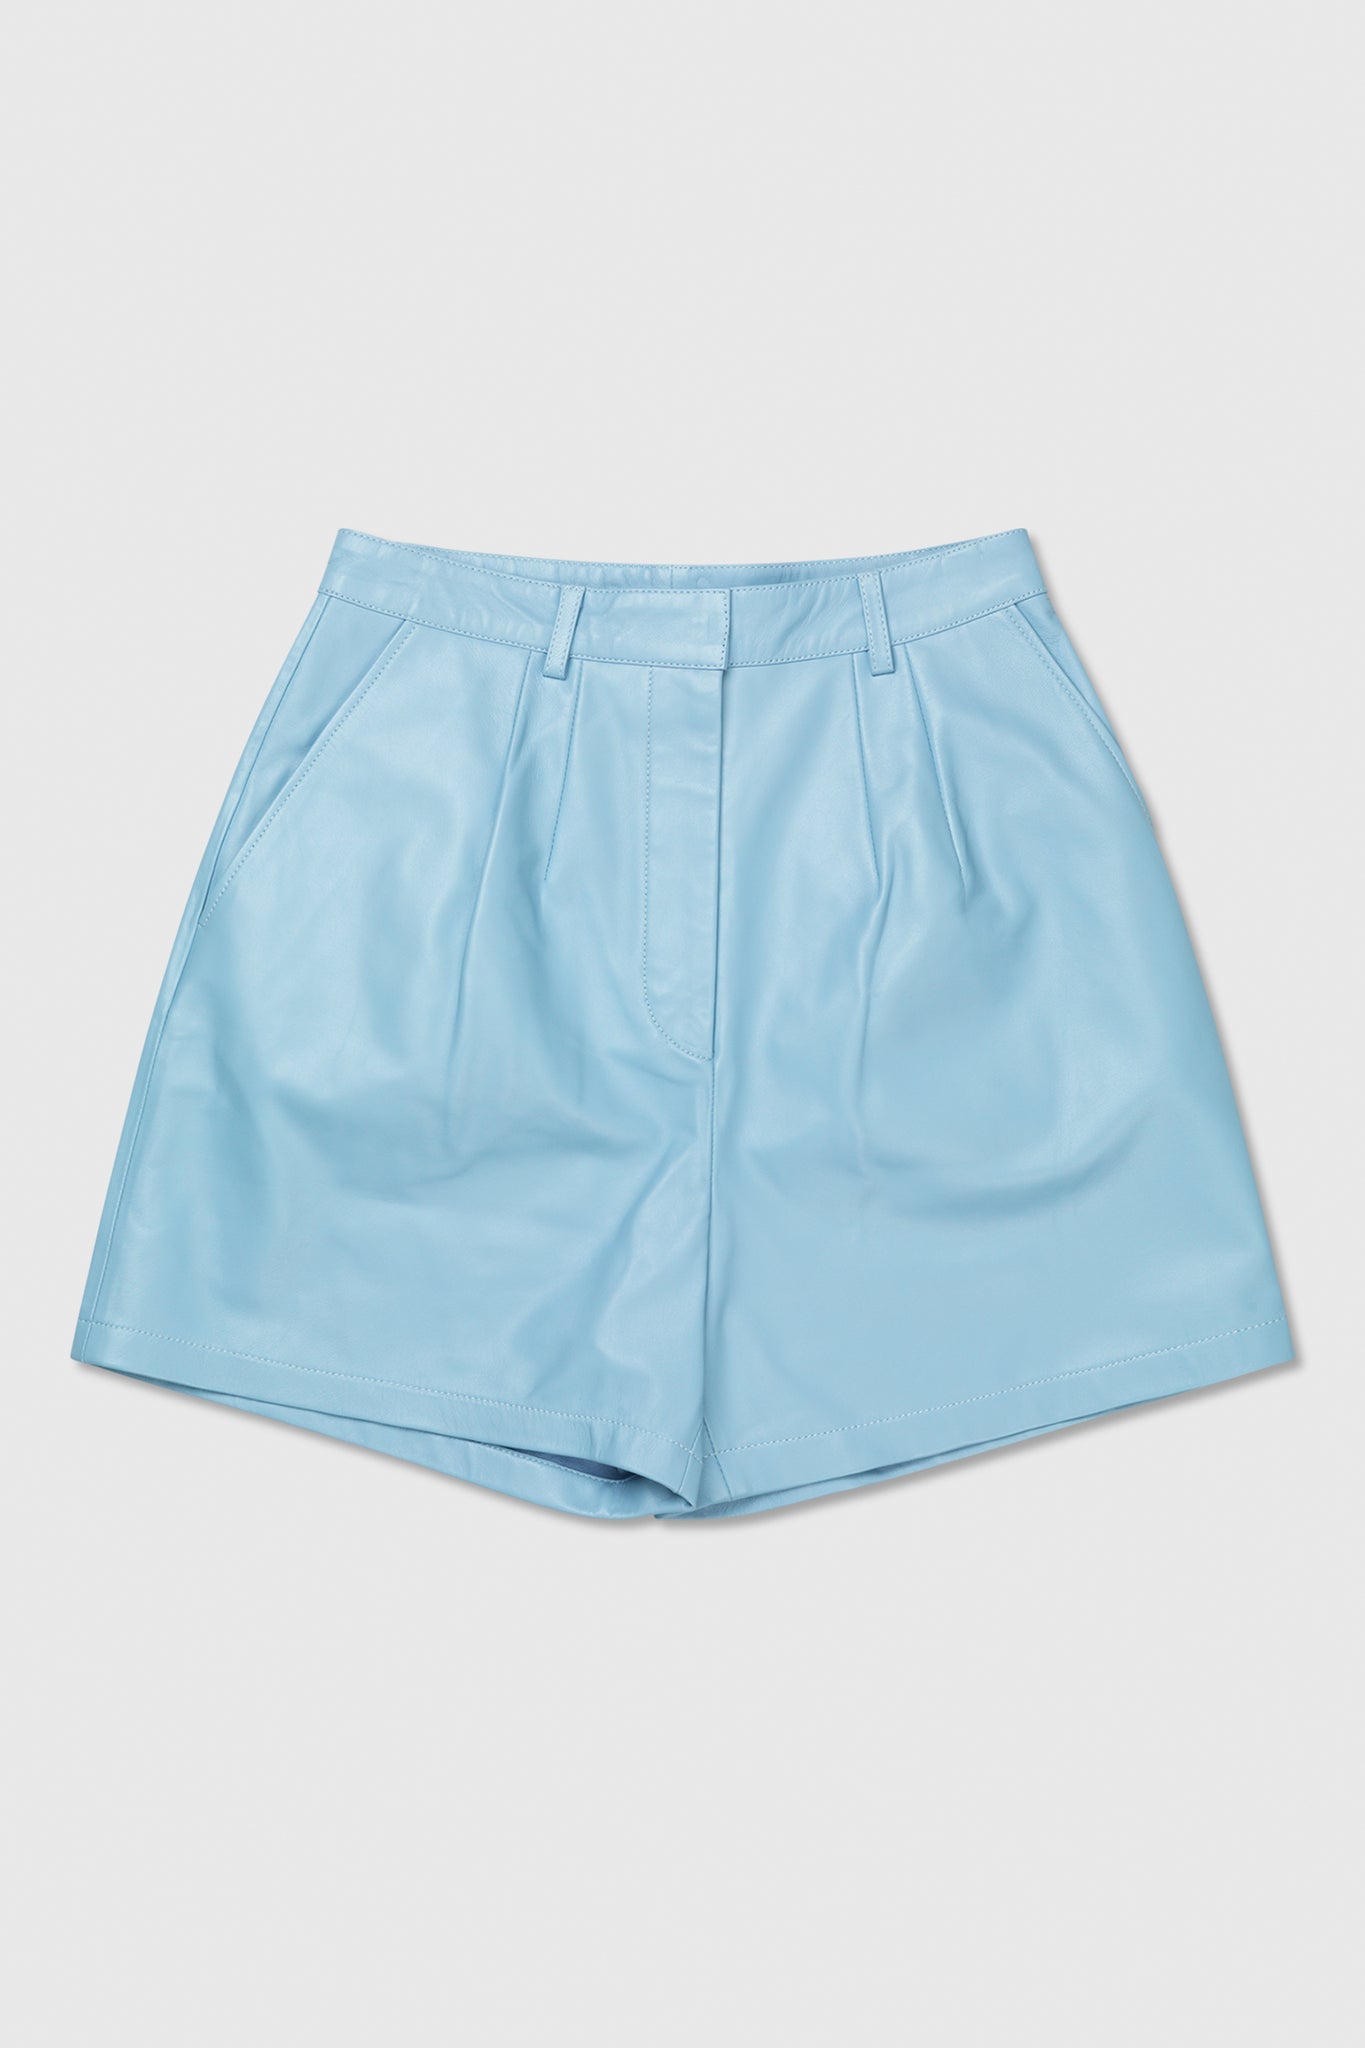 Zoe leather shorts in pale blue by Wood Wood